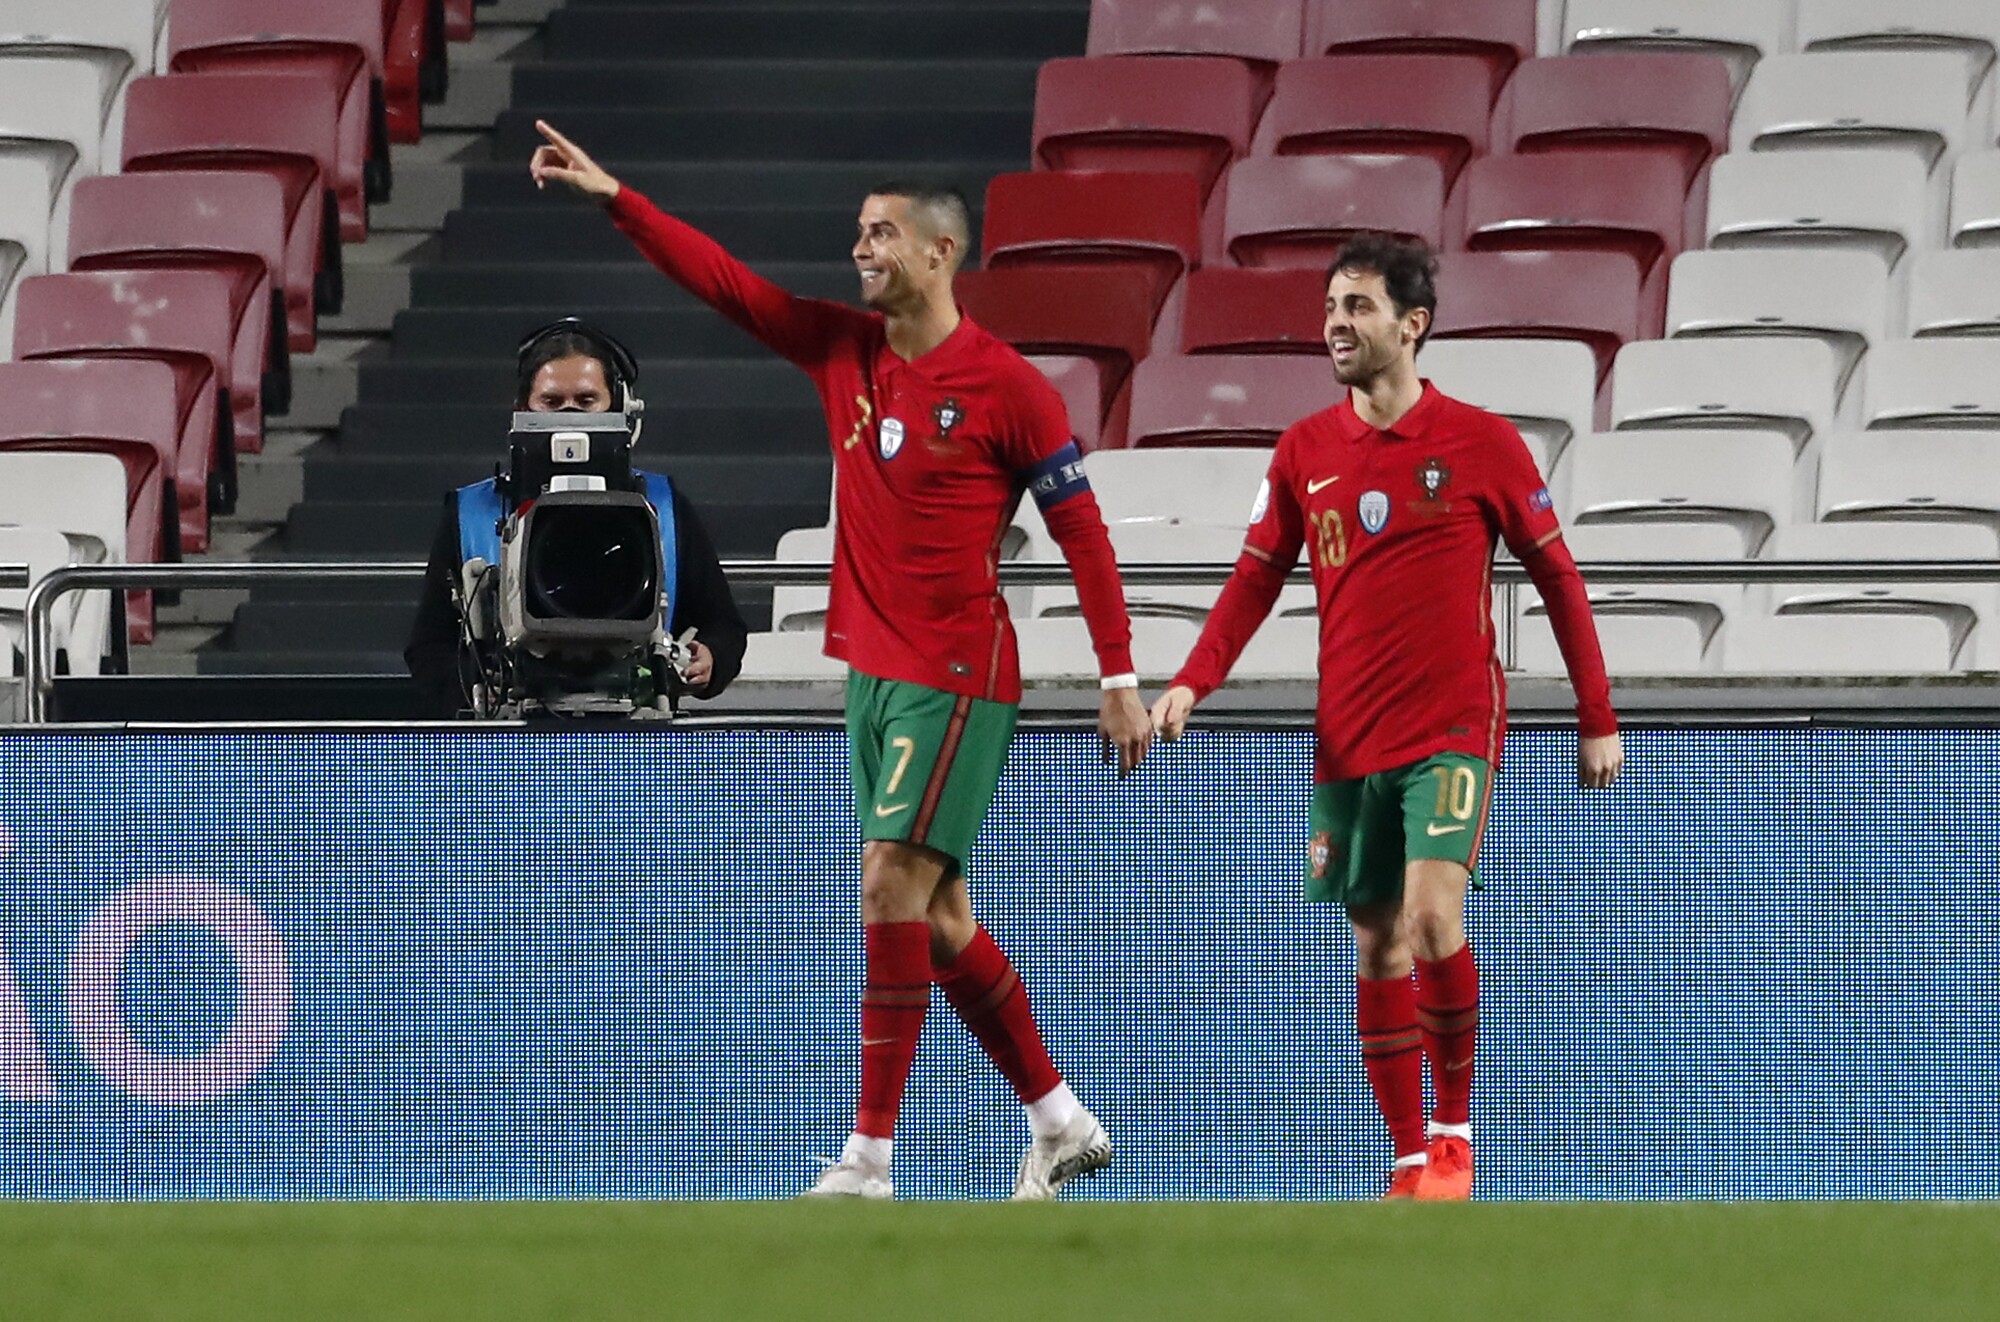 Cristiano Ronaldo (left), Portugal national team player, is congratulated by his teammate